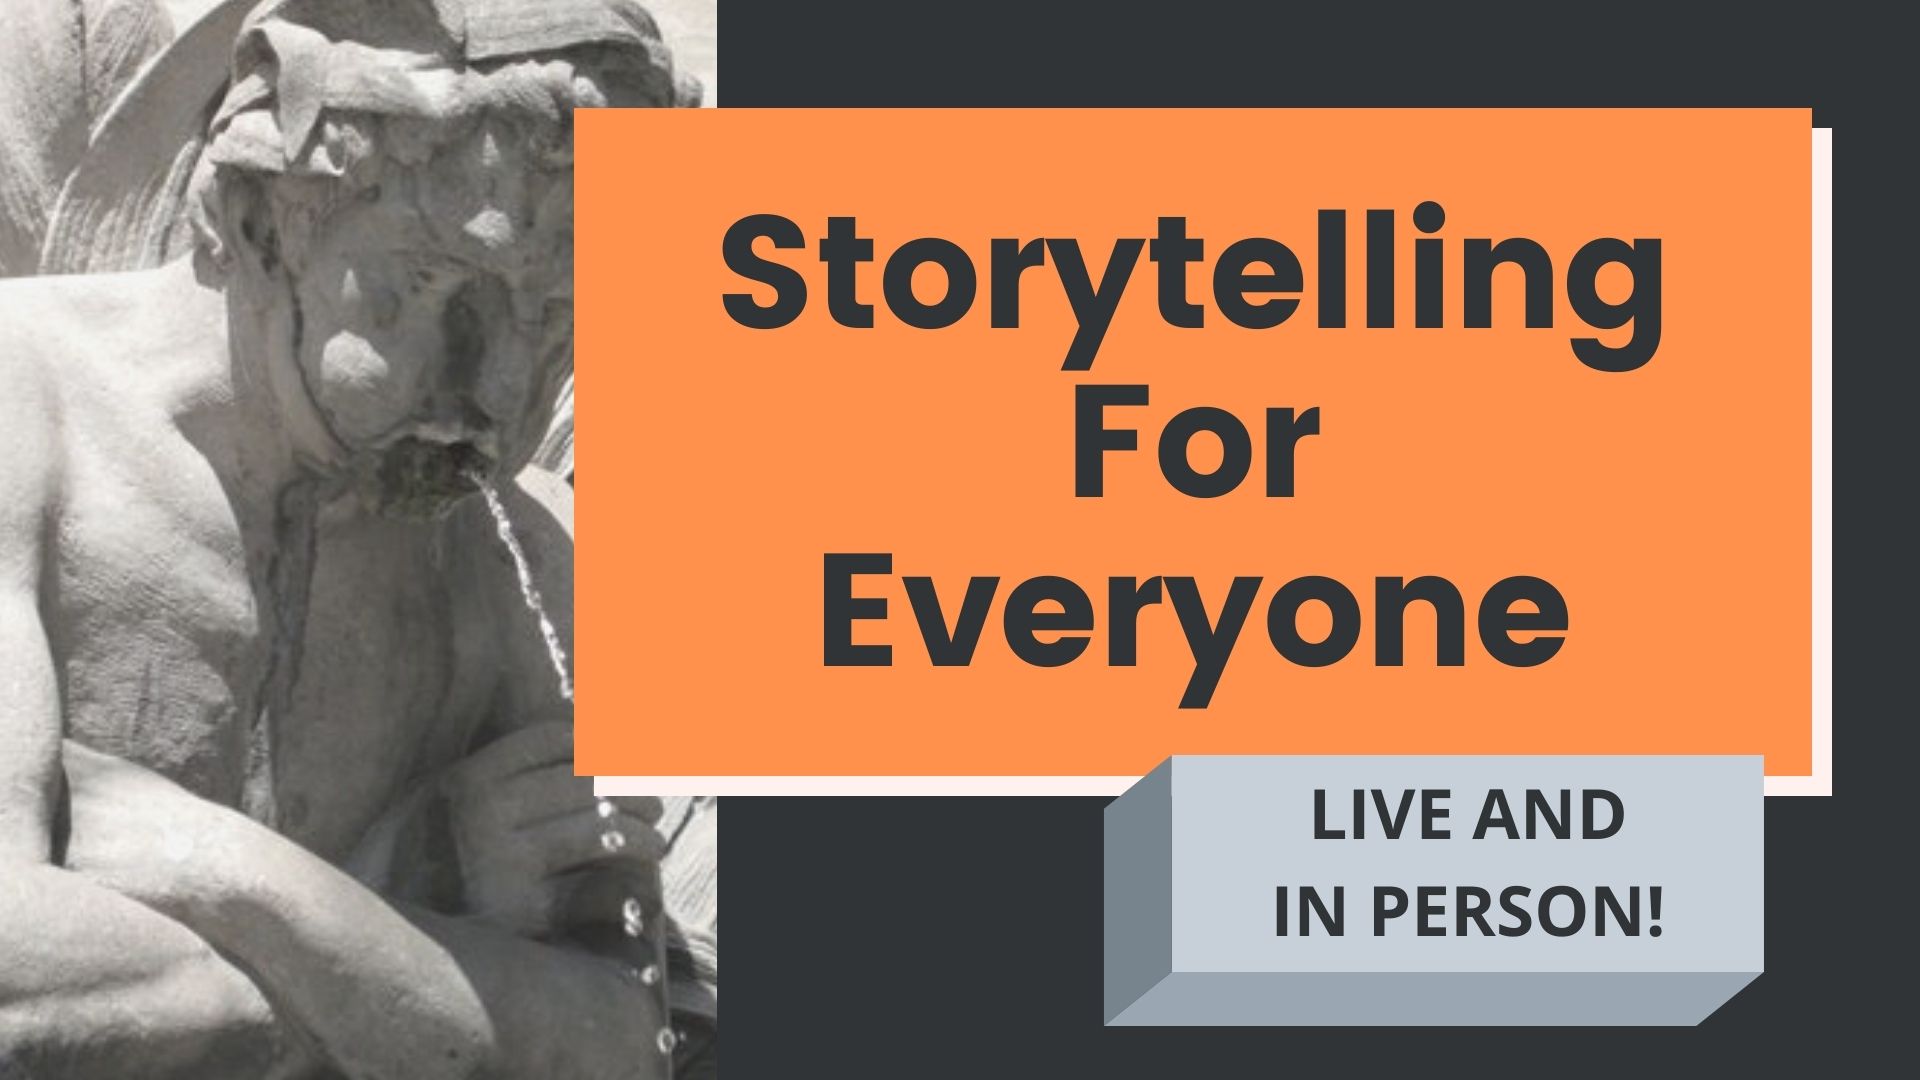 Storytelling For Everyone: Four Week Course in Personal Narrative (Mondays in April)